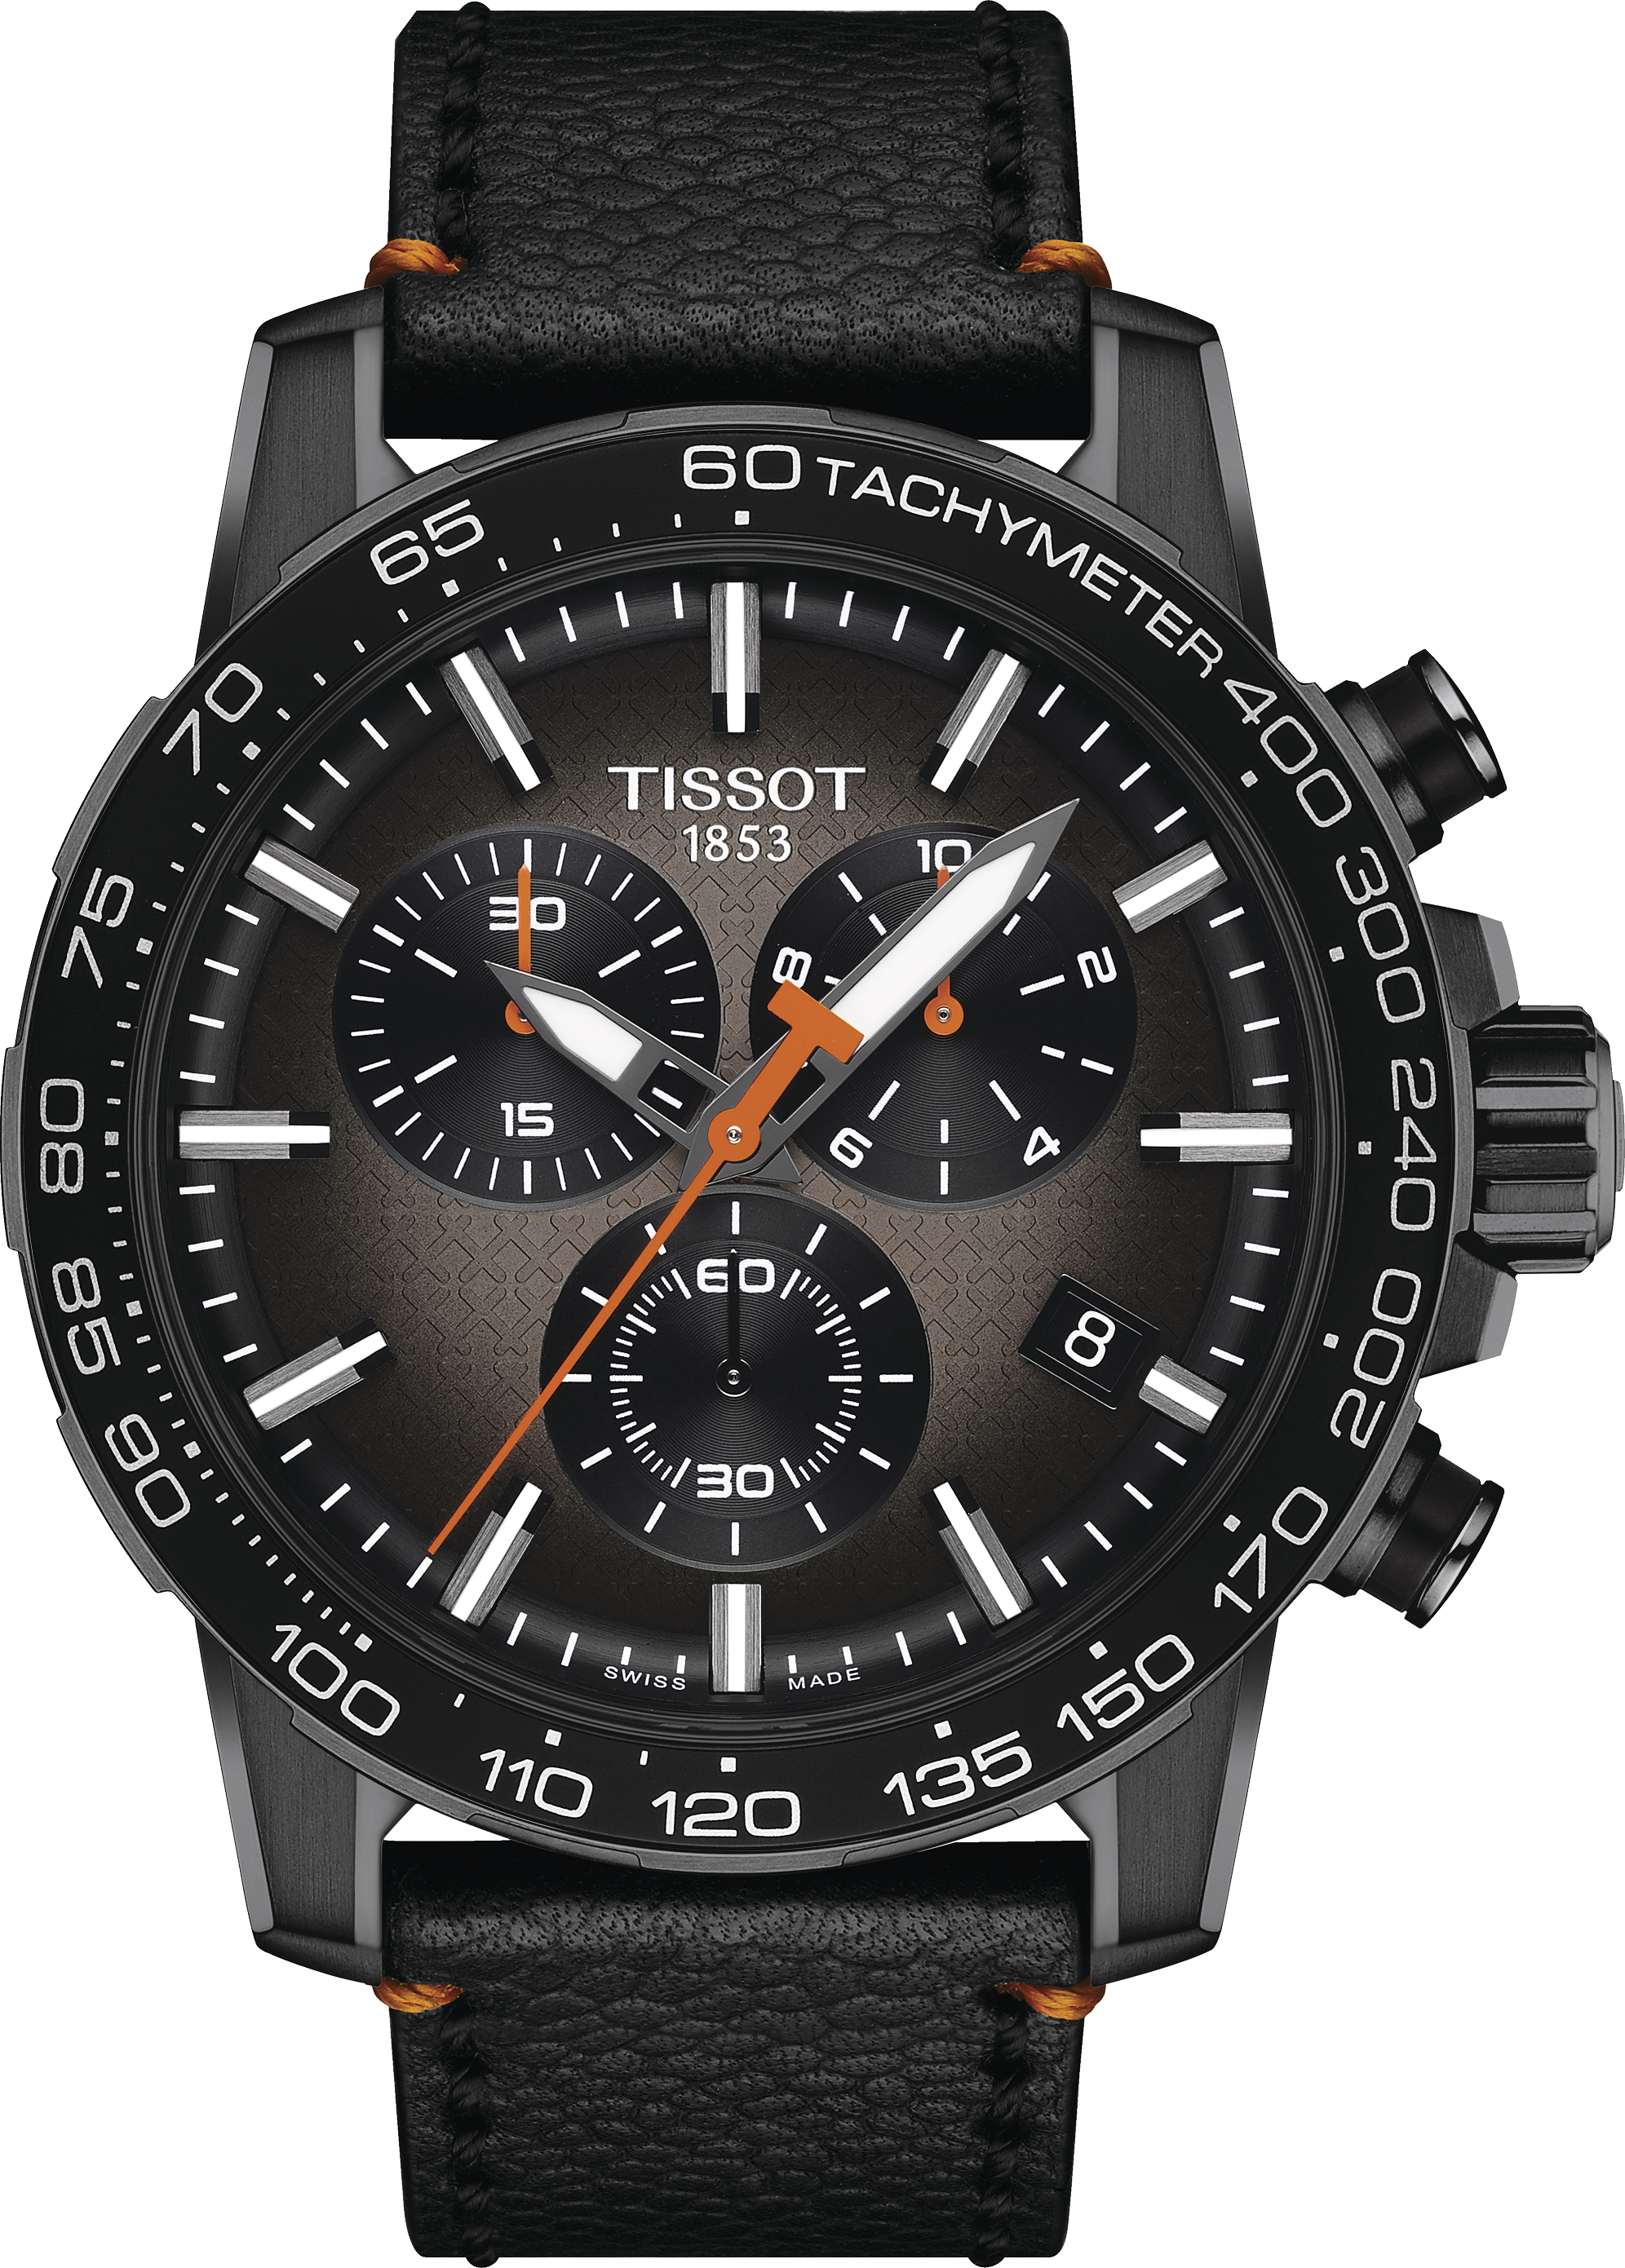 Mens Steel Tissot Supersport Chronograph Watch on Leather Strap